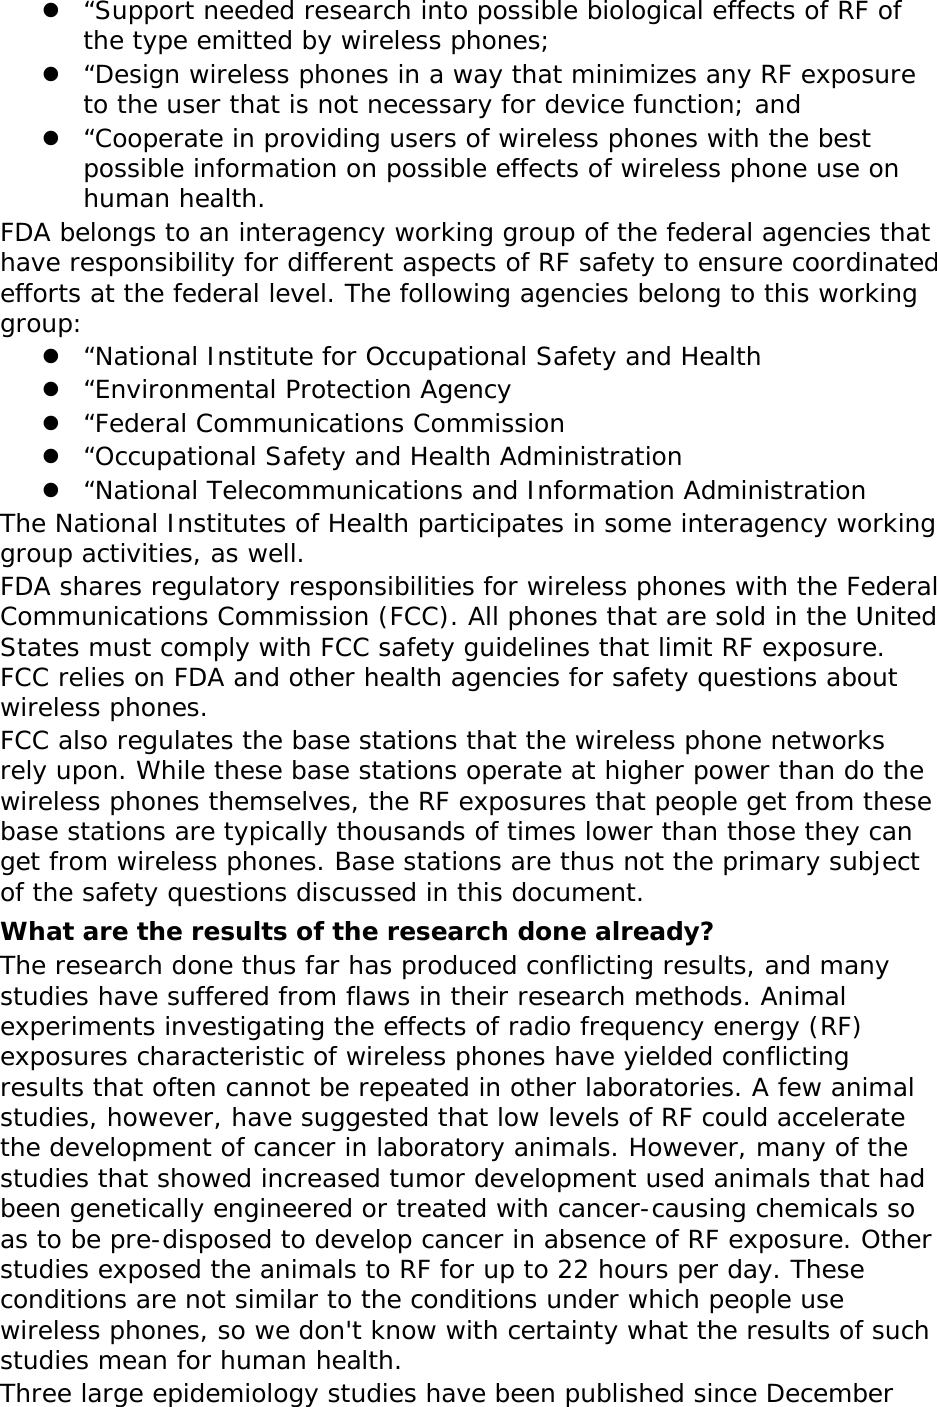 z “Support needed research into possible biological effects of RF of the type emitted by wireless phones; z “Design wireless phones in a way that minimizes any RF exposure to the user that is not necessary for device function; and z “Cooperate in providing users of wireless phones with the best possible information on possible effects of wireless phone use on human health. FDA belongs to an interagency working group of the federal agencies that have responsibility for different aspects of RF safety to ensure coordinated efforts at the federal level. The following agencies belong to this working group: z “National Institute for Occupational Safety and Health z “Environmental Protection Agency z “Federal Communications Commission z “Occupational Safety and Health Administration z “National Telecommunications and Information Administration The National Institutes of Health participates in some interagency working group activities, as well. FDA shares regulatory responsibilities for wireless phones with the Federal Communications Commission (FCC). All phones that are sold in the United States must comply with FCC safety guidelines that limit RF exposure. FCC relies on FDA and other health agencies for safety questions about wireless phones. FCC also regulates the base stations that the wireless phone networks rely upon. While these base stations operate at higher power than do the wireless phones themselves, the RF exposures that people get from these base stations are typically thousands of times lower than those they can get from wireless phones. Base stations are thus not the primary subject of the safety questions discussed in this document. What are the results of the research done already? The research done thus far has produced conflicting results, and many studies have suffered from flaws in their research methods. Animal experiments investigating the effects of radio frequency energy (RF) exposures characteristic of wireless phones have yielded conflicting results that often cannot be repeated in other laboratories. A few animal studies, however, have suggested that low levels of RF could accelerate the development of cancer in laboratory animals. However, many of the studies that showed increased tumor development used animals that had been genetically engineered or treated with cancer-causing chemicals so as to be pre-disposed to develop cancer in absence of RF exposure. Other studies exposed the animals to RF for up to 22 hours per day. These conditions are not similar to the conditions under which people use wireless phones, so we don&apos;t know with certainty what the results of such studies mean for human health. Three large epidemiology studies have been published since December 